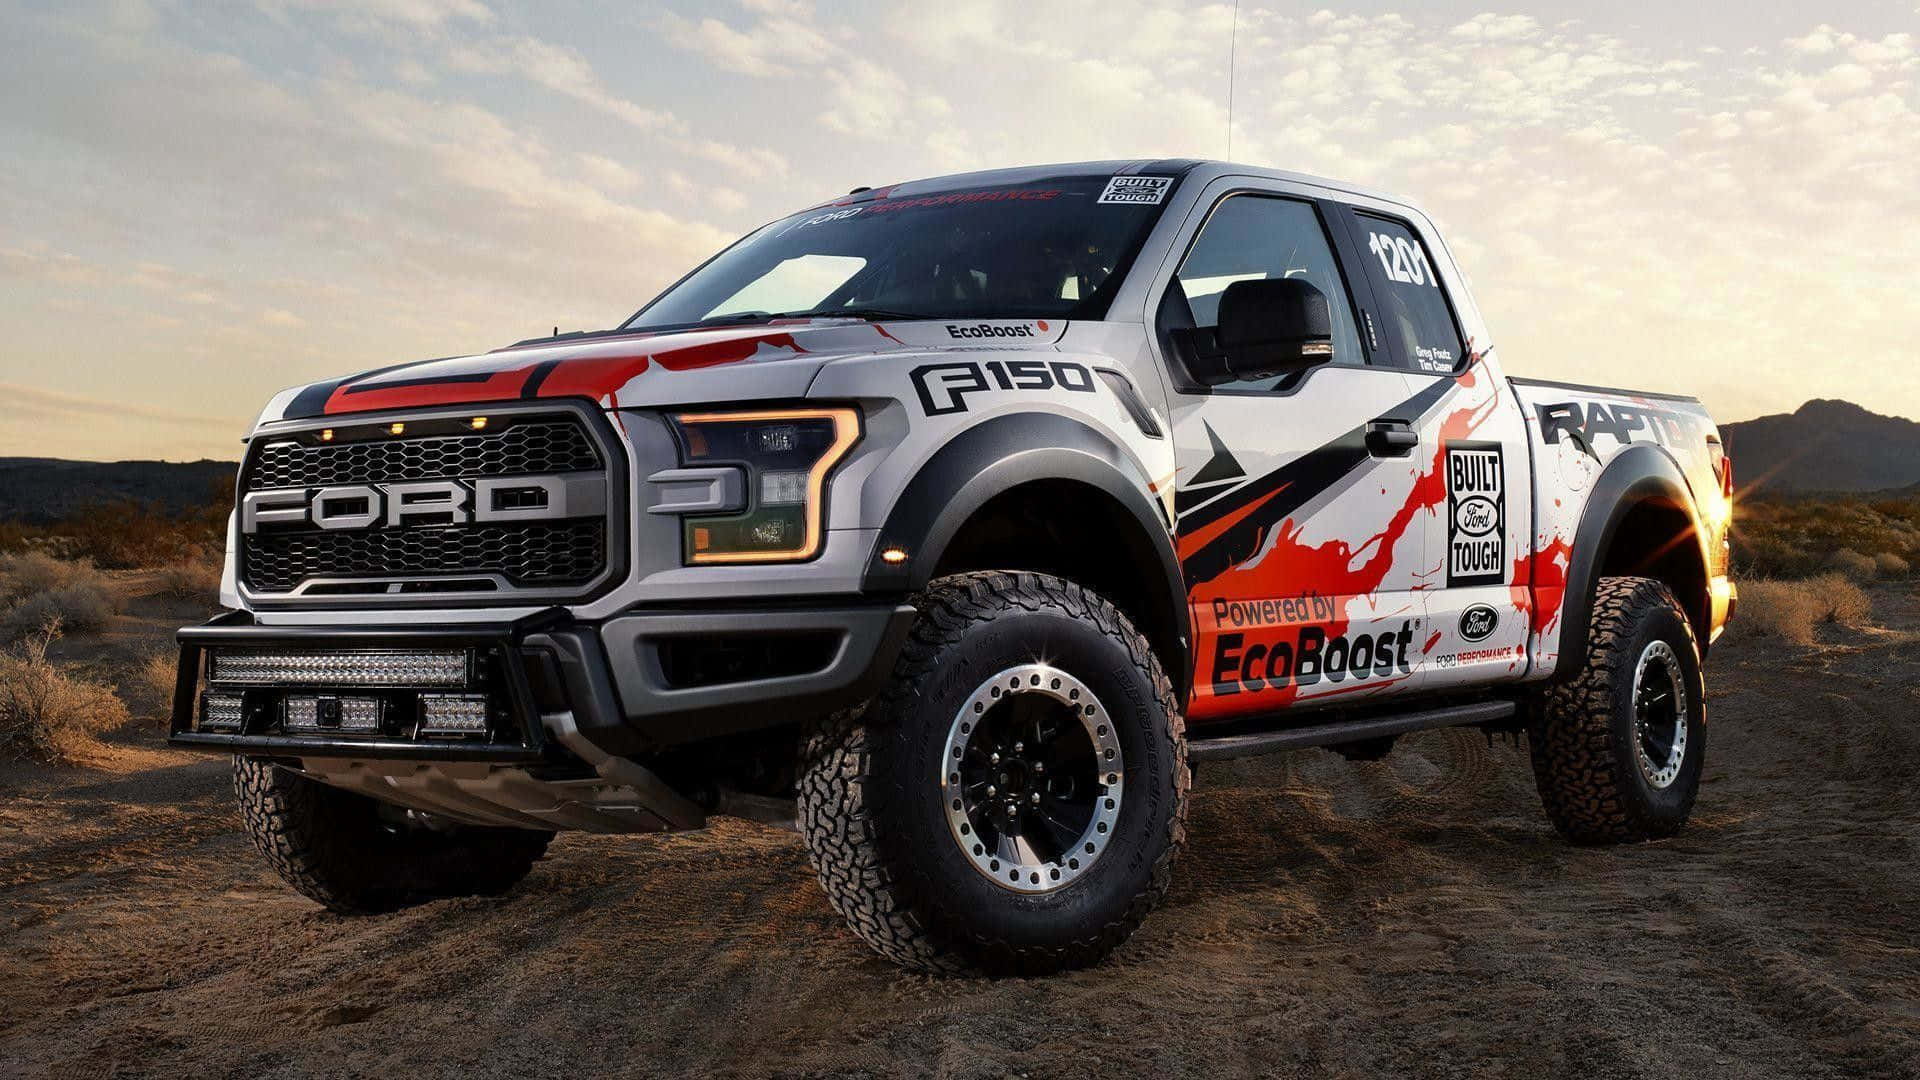 The Ford F - 150 Rpc Is Driving On A Dirt Road Wallpaper